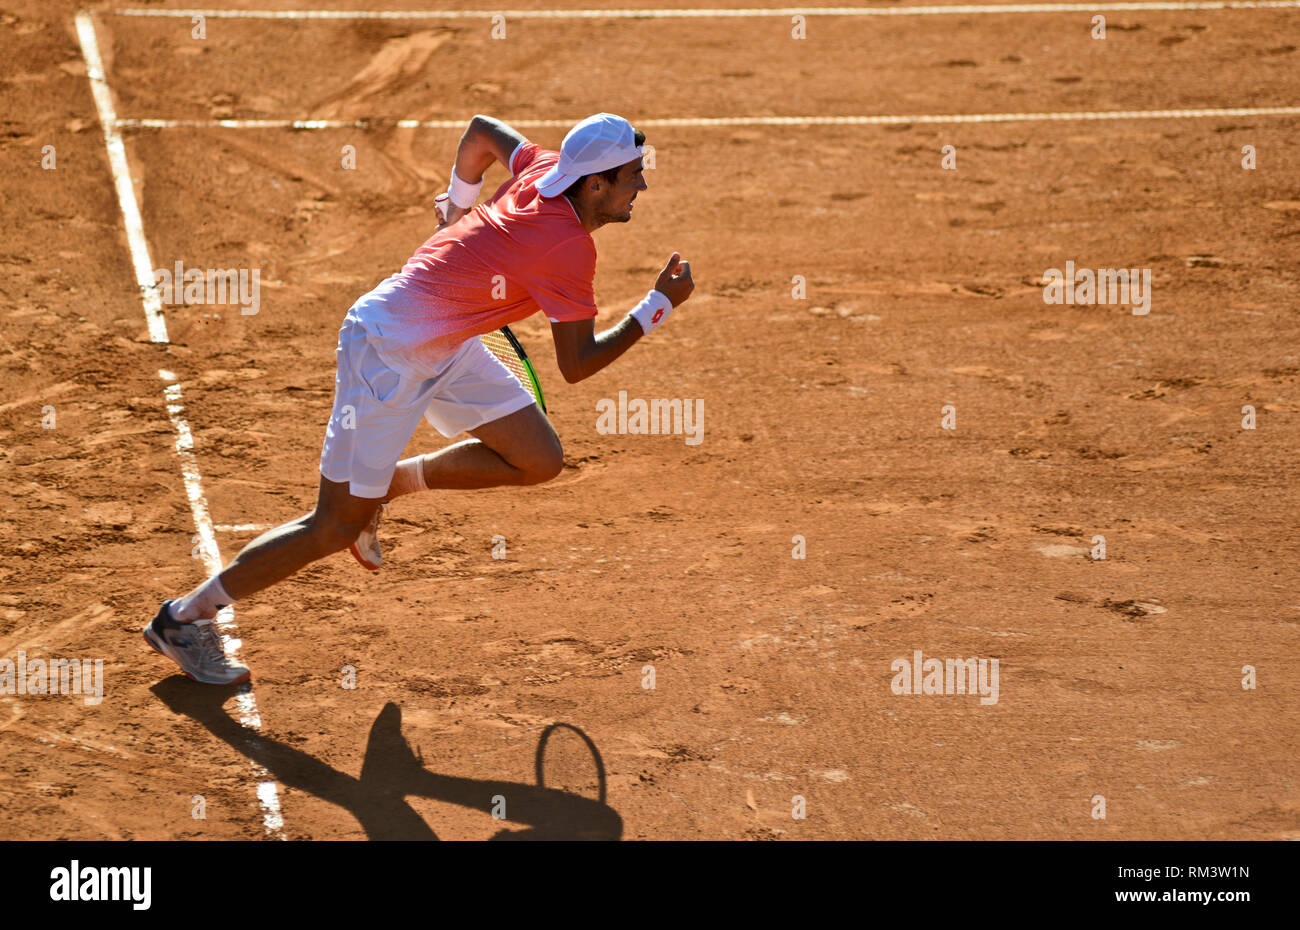 Buenos Aires, Argentina. 12th Feb 2019. Guido Pella (Argentina) defeated Francisco Cerundolo and advances to the second round of the Argentina Open, an ATP 250 tennis tournament Credit: Mariano Garcia/Alamy Live News Stock Photo